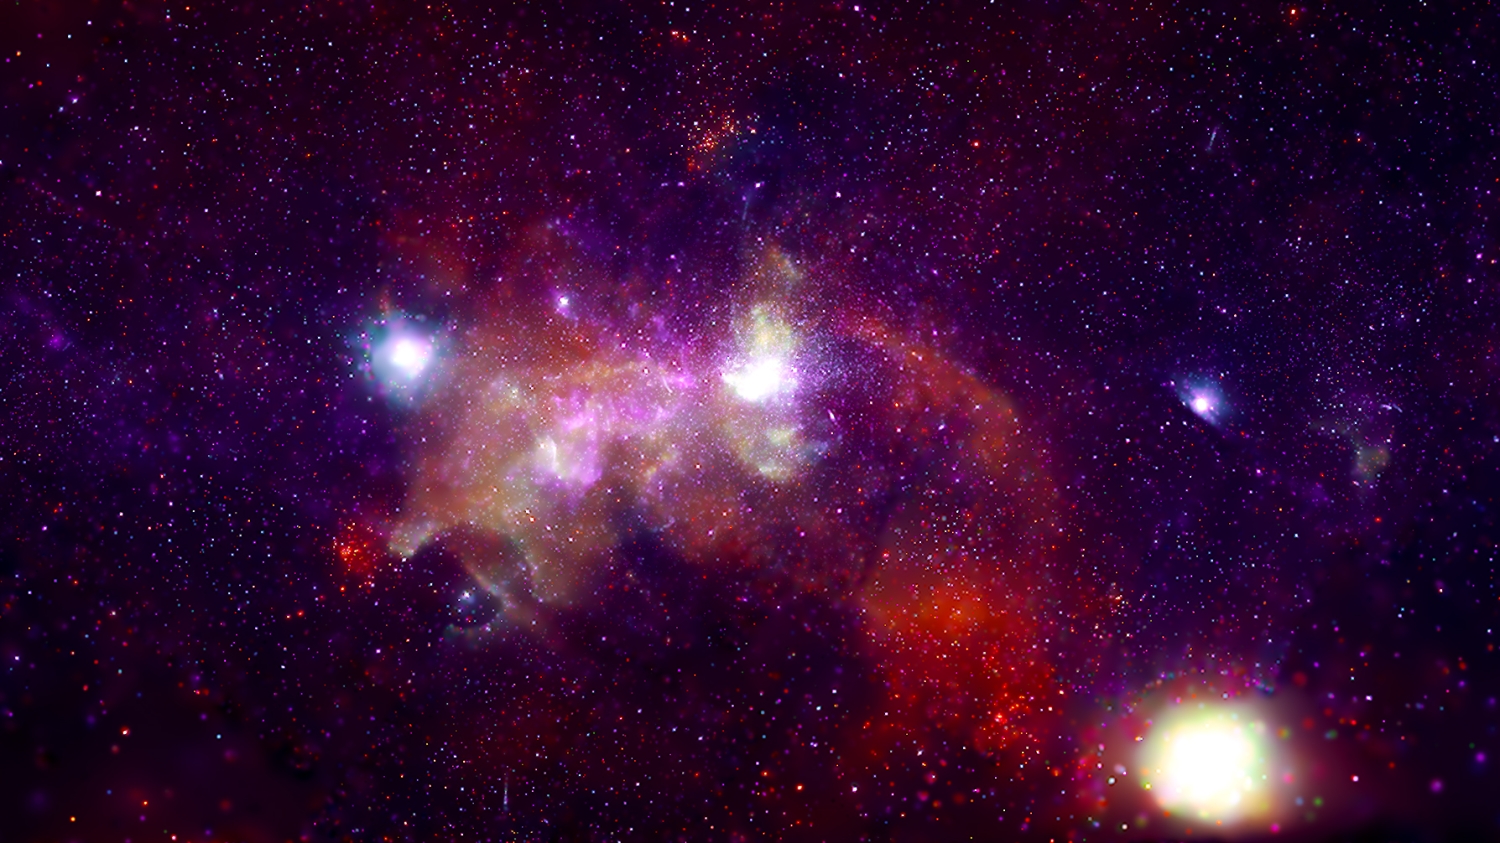 TweakTown Enlarged Image - <strong>Galactic Center</strong>: The Galactic Center is about 26,000 light-years from Earth, but telescopes like NASA's Chandra X-ray Observatory (orange, green, blue, purple) allow us to visit virtually. The center of the Milky Way contains a supermassi